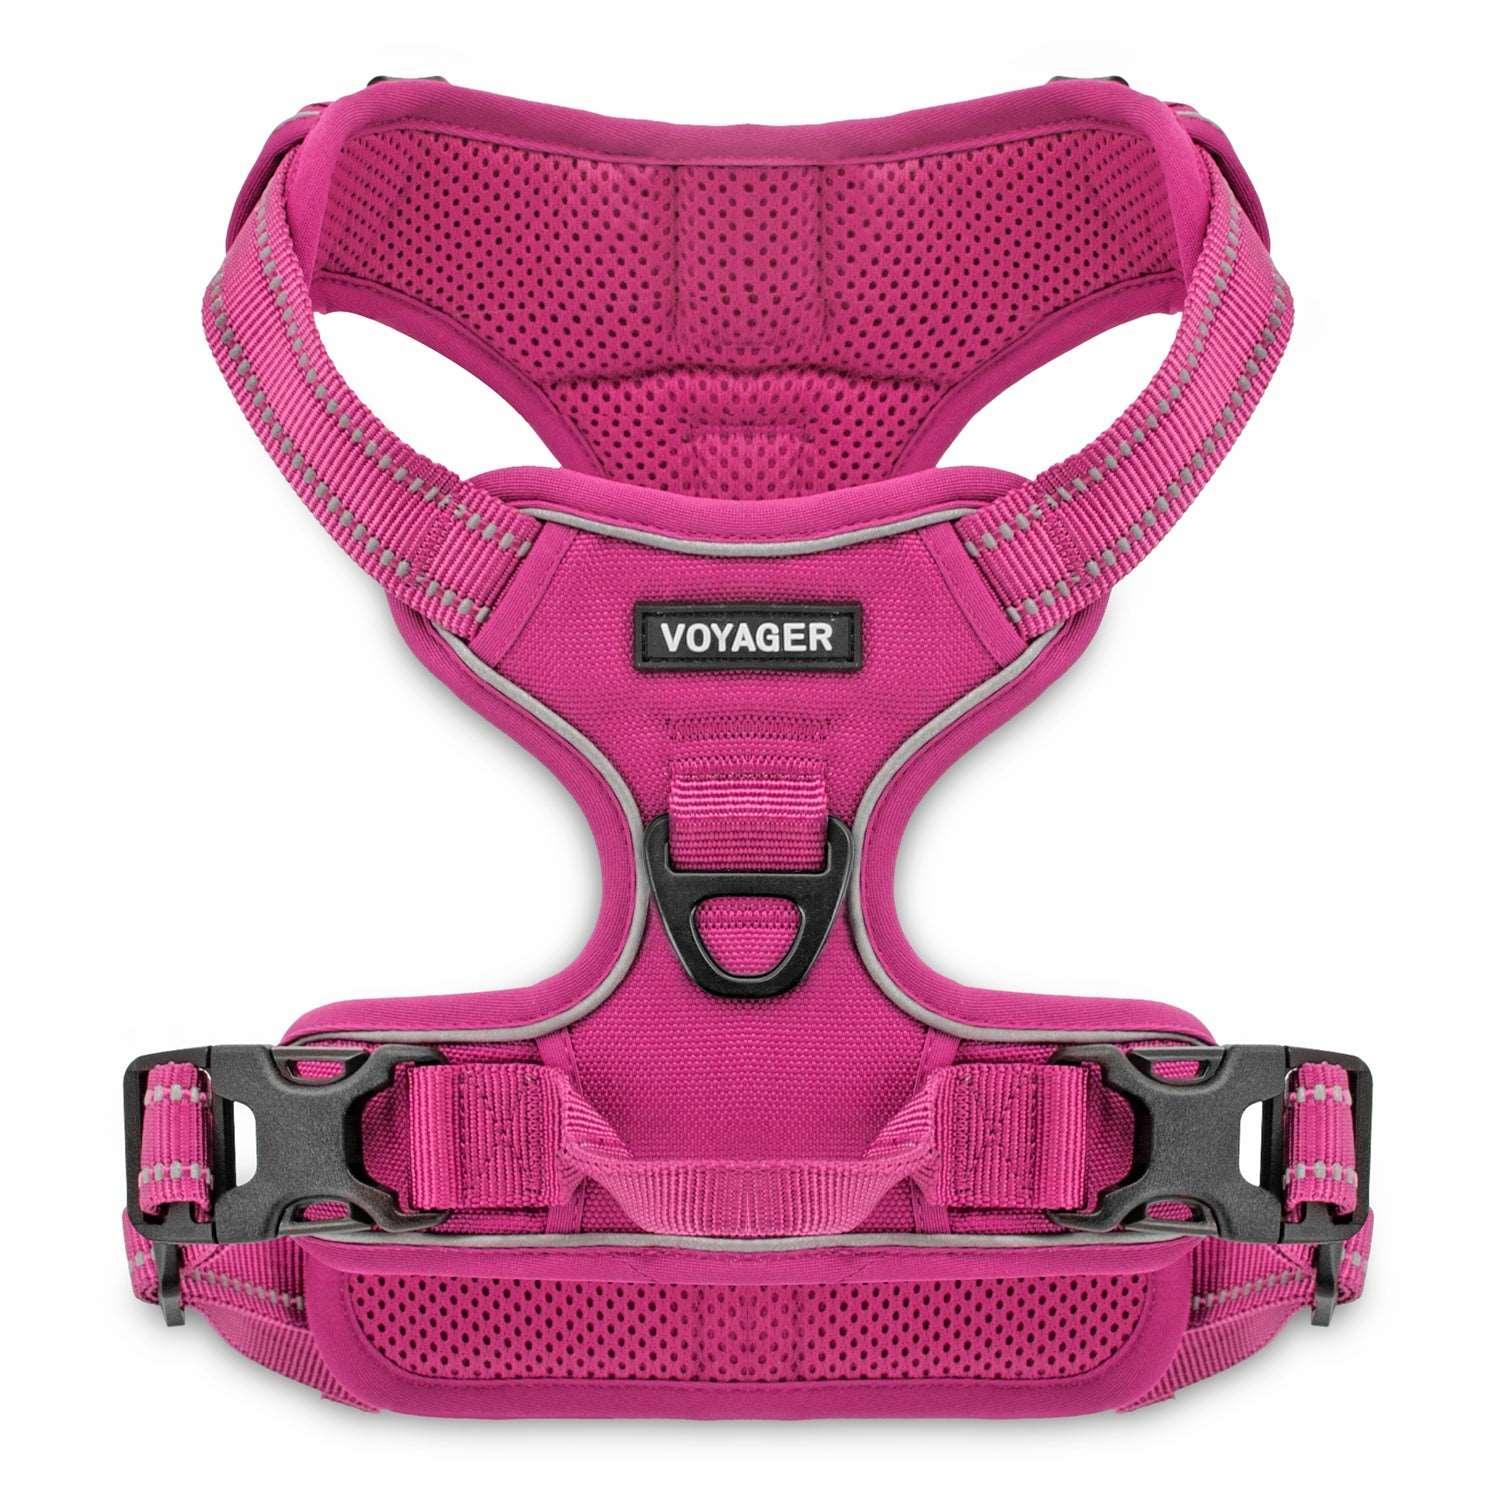 VOYAGER Dual-Attachment Dog Harness in fuchsia - Front